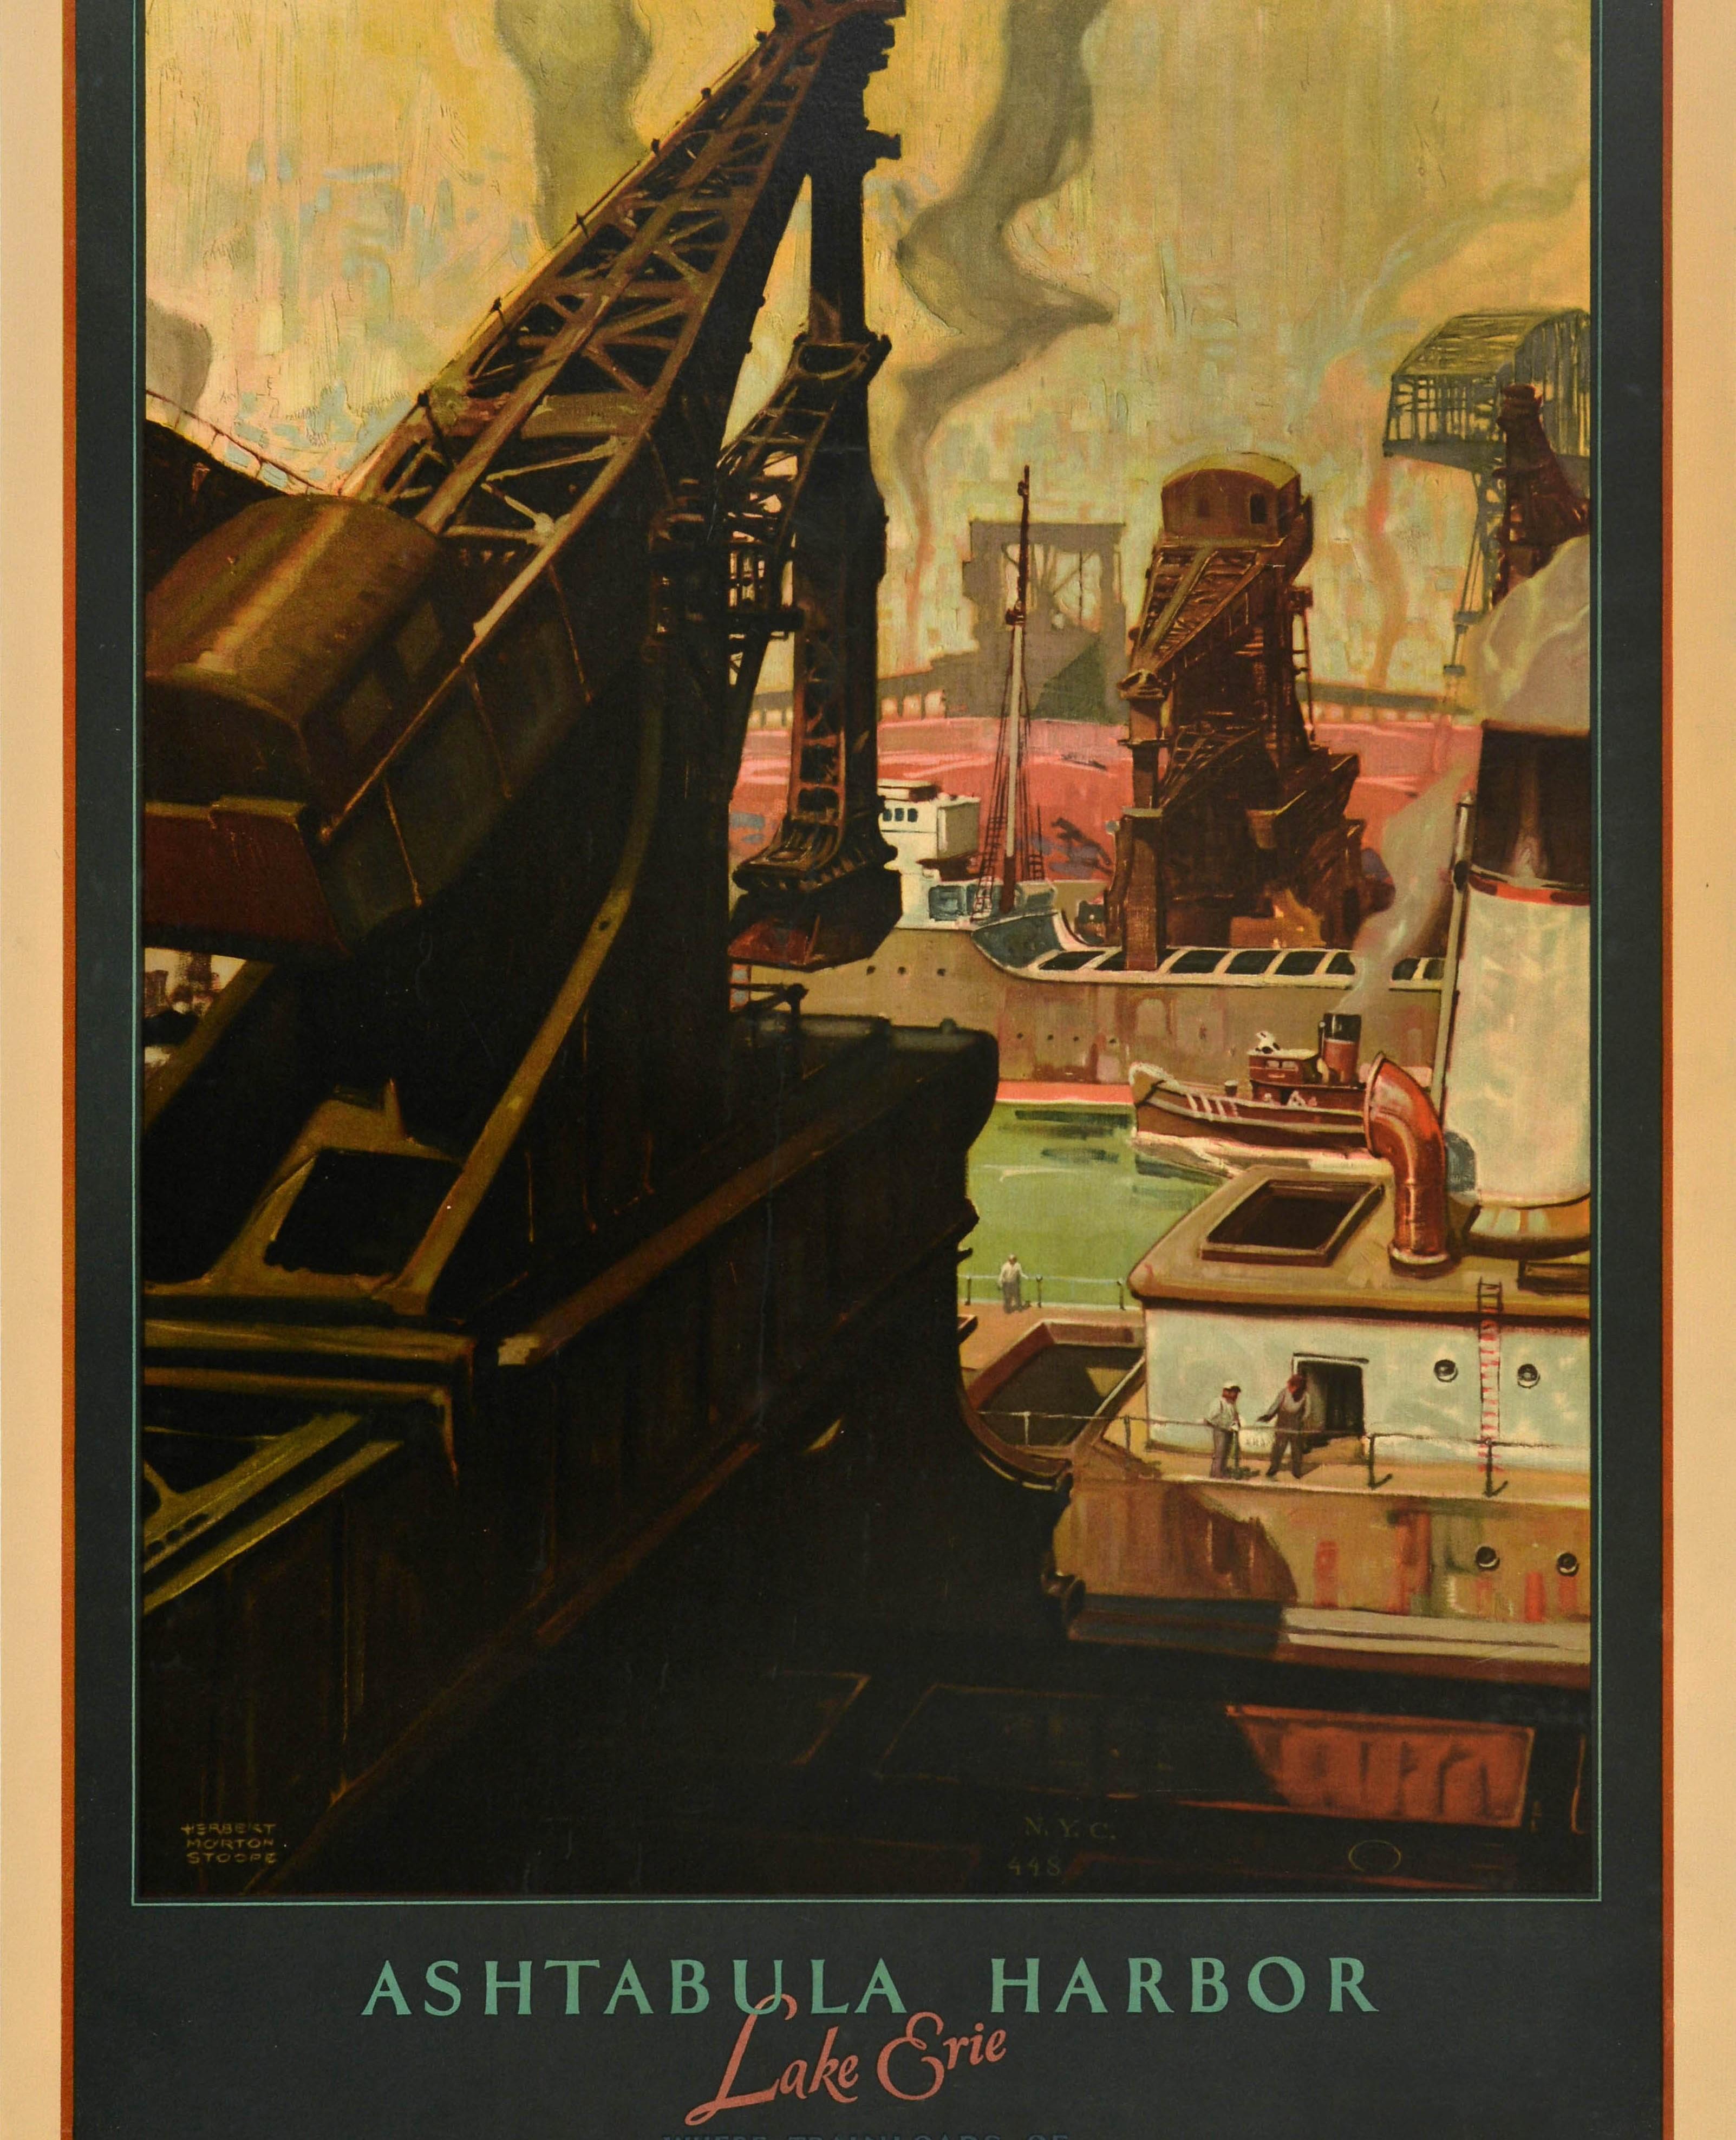 Original vintage rail transport advertising poster - Ashtabula Harbor Lake Erie where trainloads of Appalachian coal are exchanged for cargoes of Northern iron ore New York Central Lines - featuring an industrial design by Herbert Morton Stoope